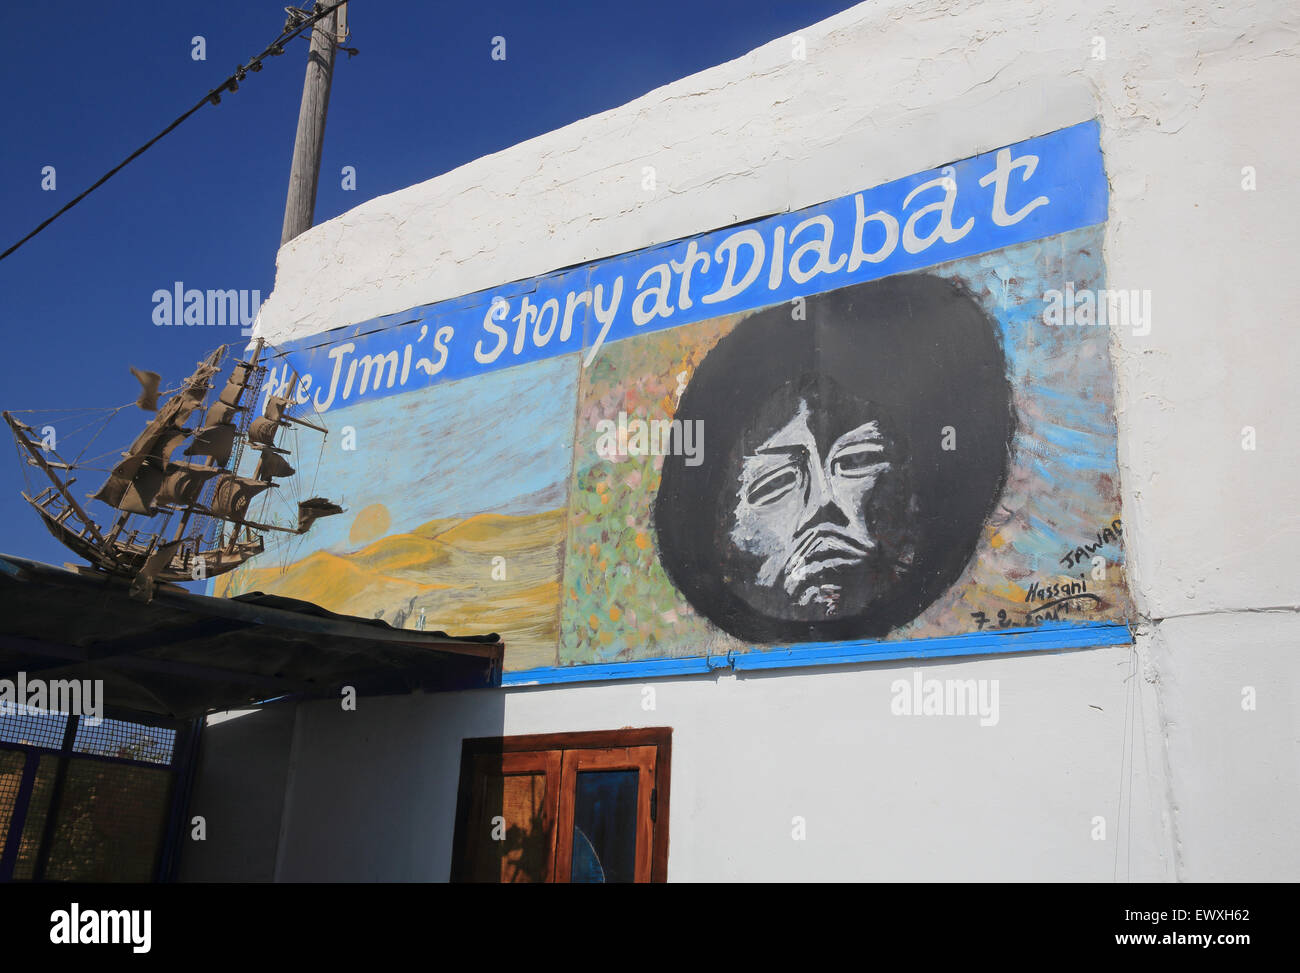 Cafe Restaurant Jimi Hendrix, in Diabat, the 1960s hippy town, near Essaouira, in Morocco, North Africa Stock Photo